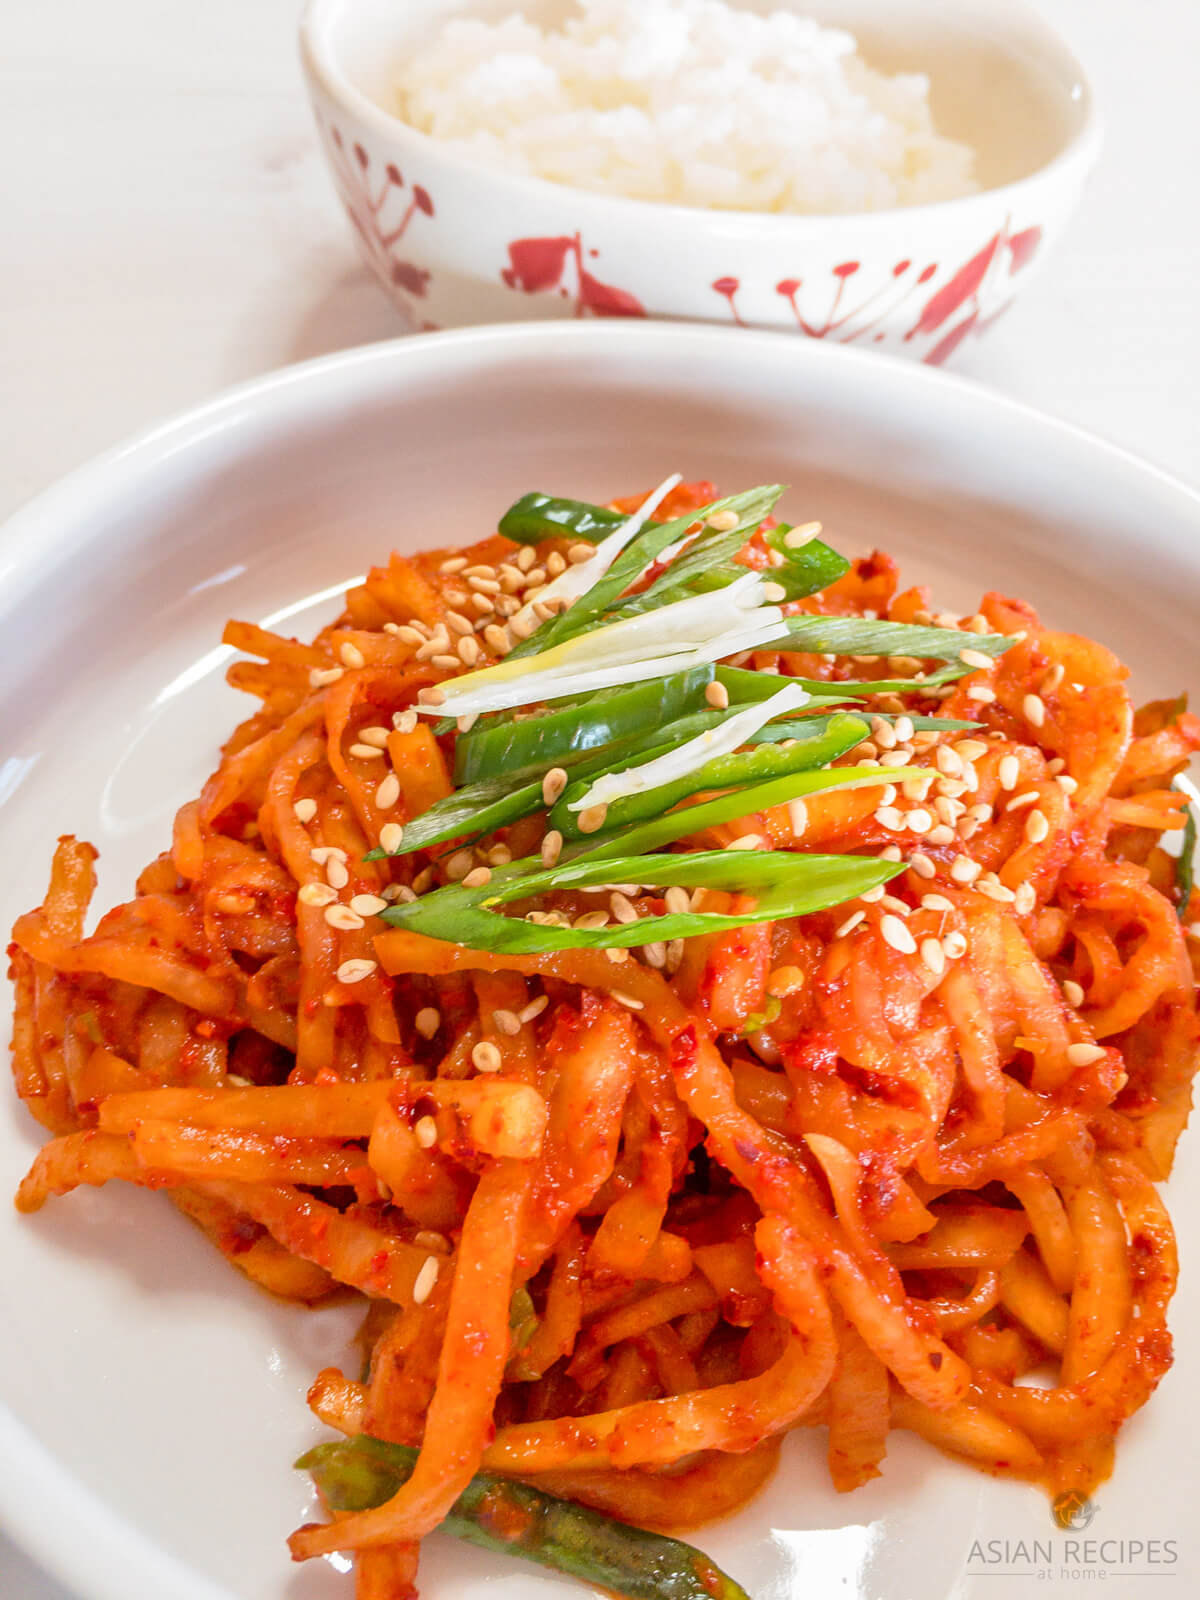 This Korean spicy radish salad (banchan) is a simple side dish to prepare. Musaengchae is a radish strip salad that is spicy, sweet, and delicious.